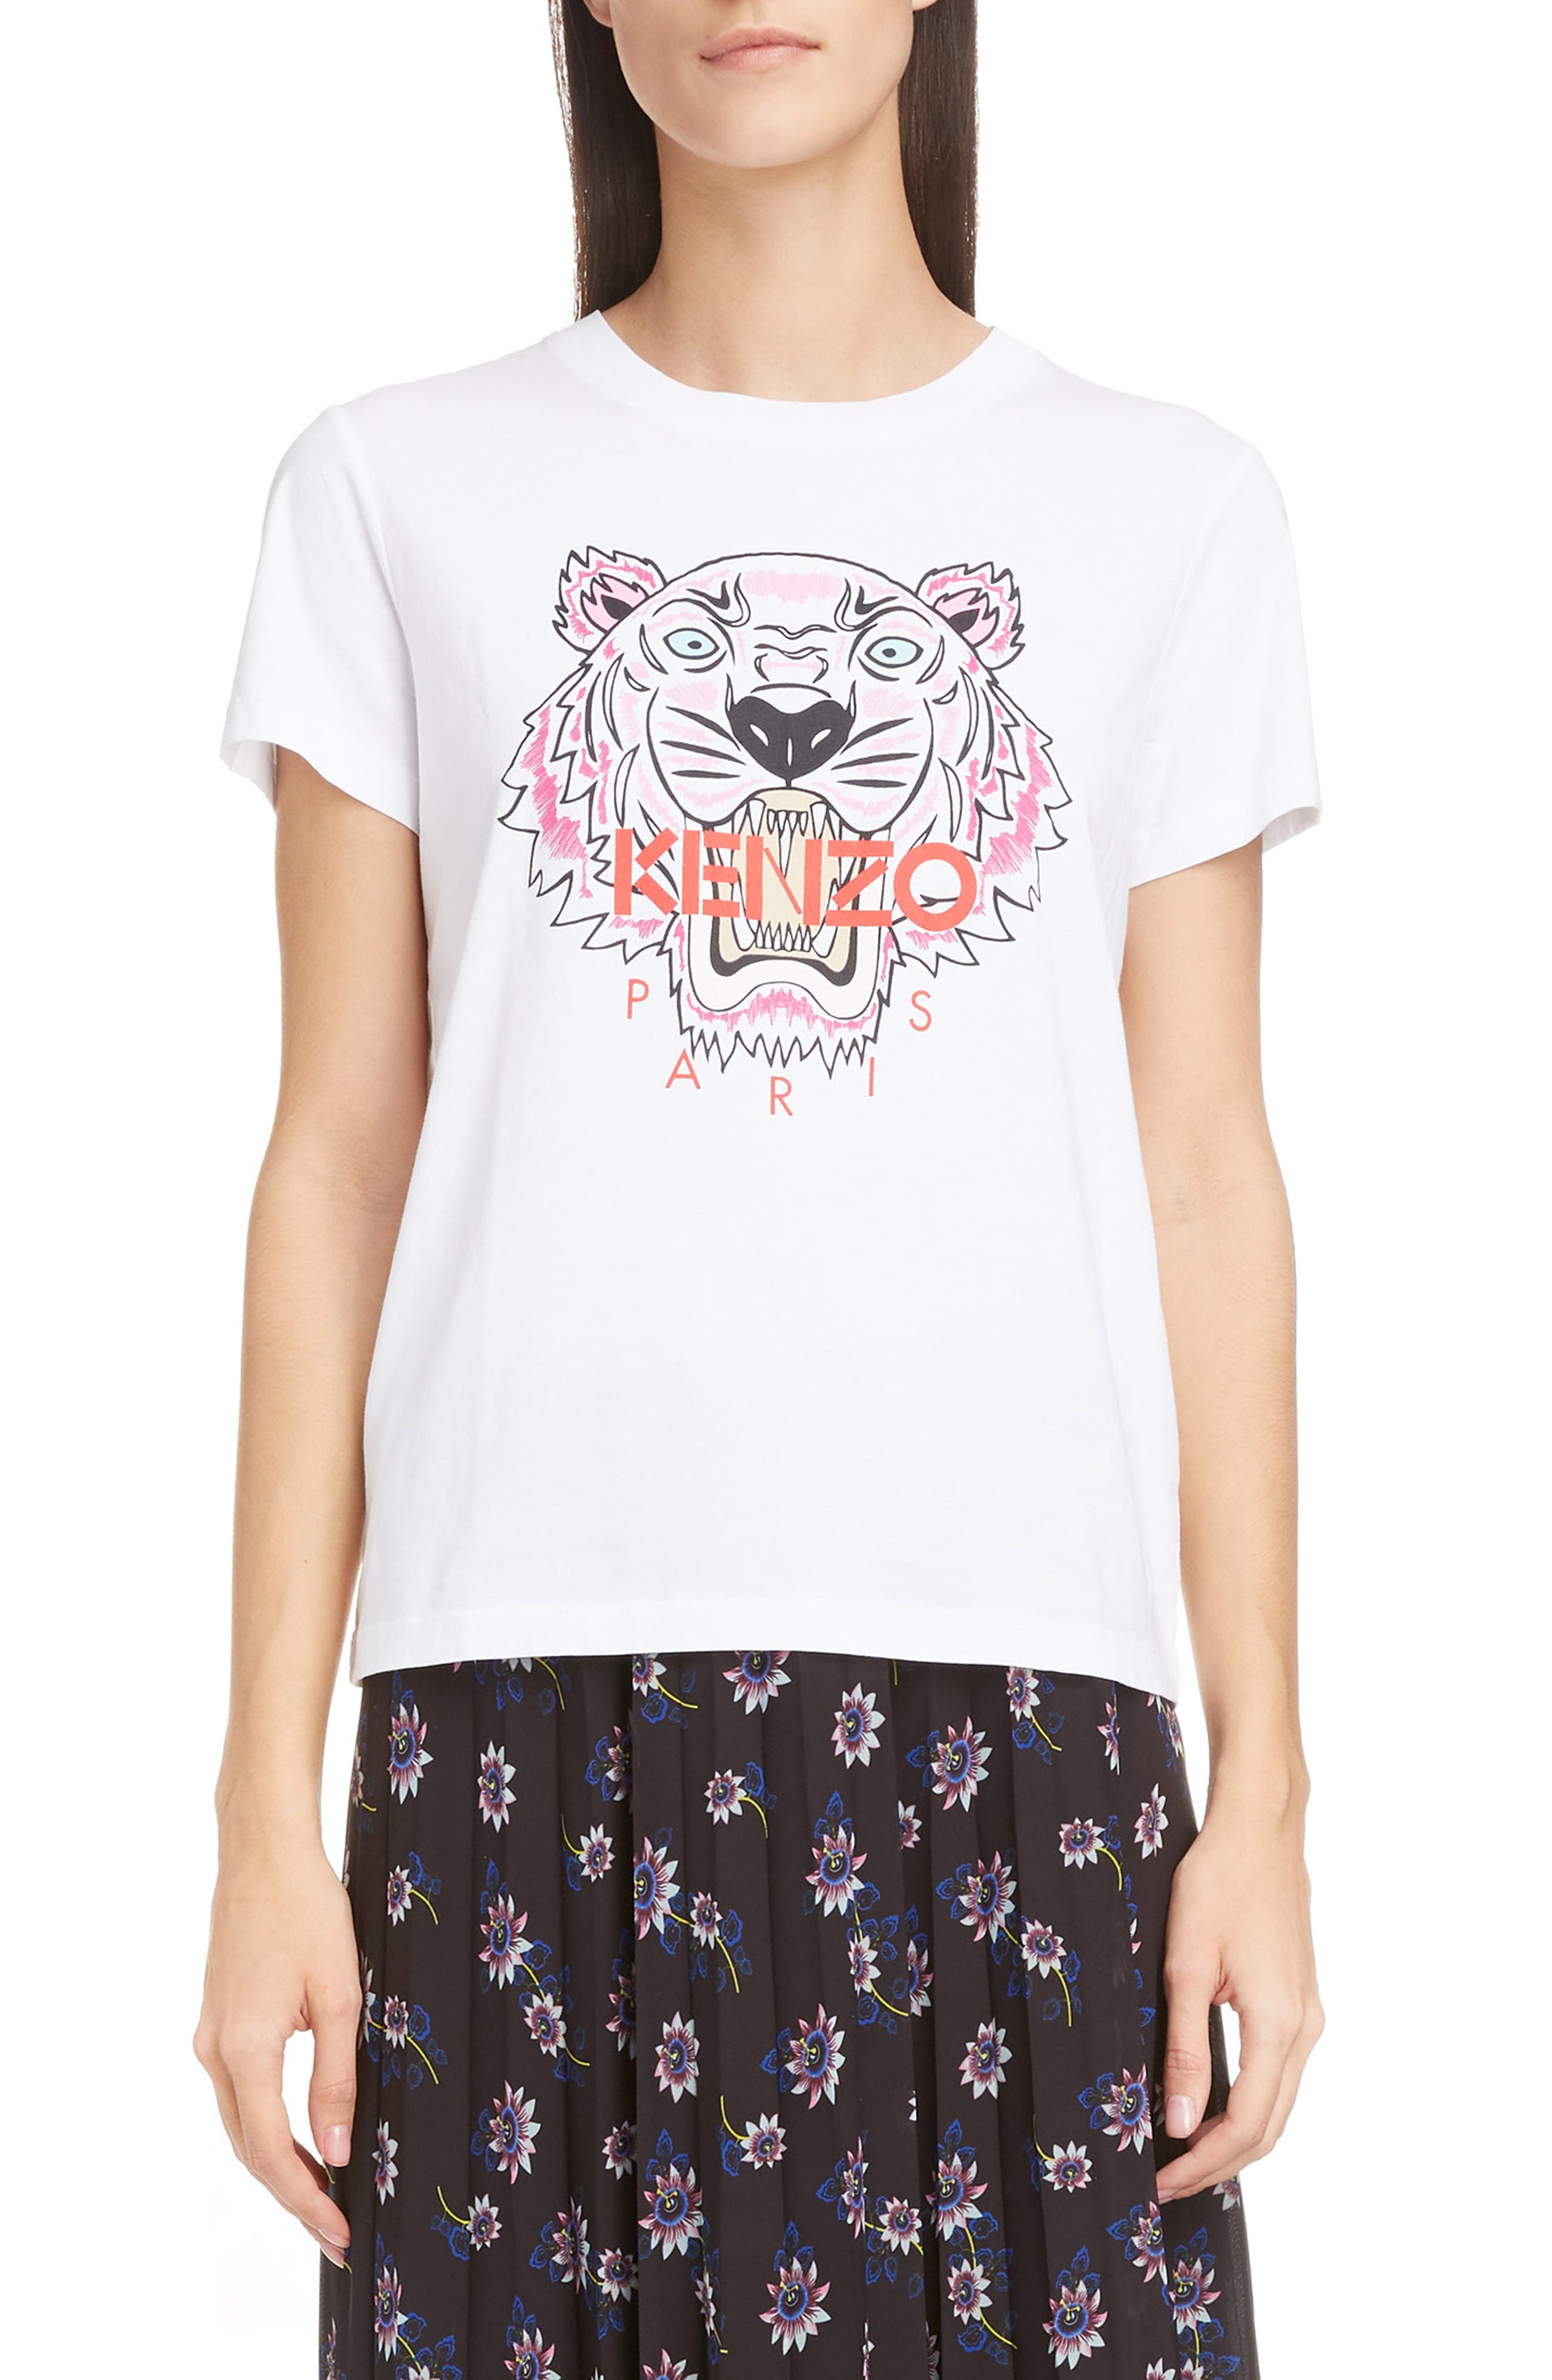 KENZO Classic Tiger Graphic Tee | Nordstrom